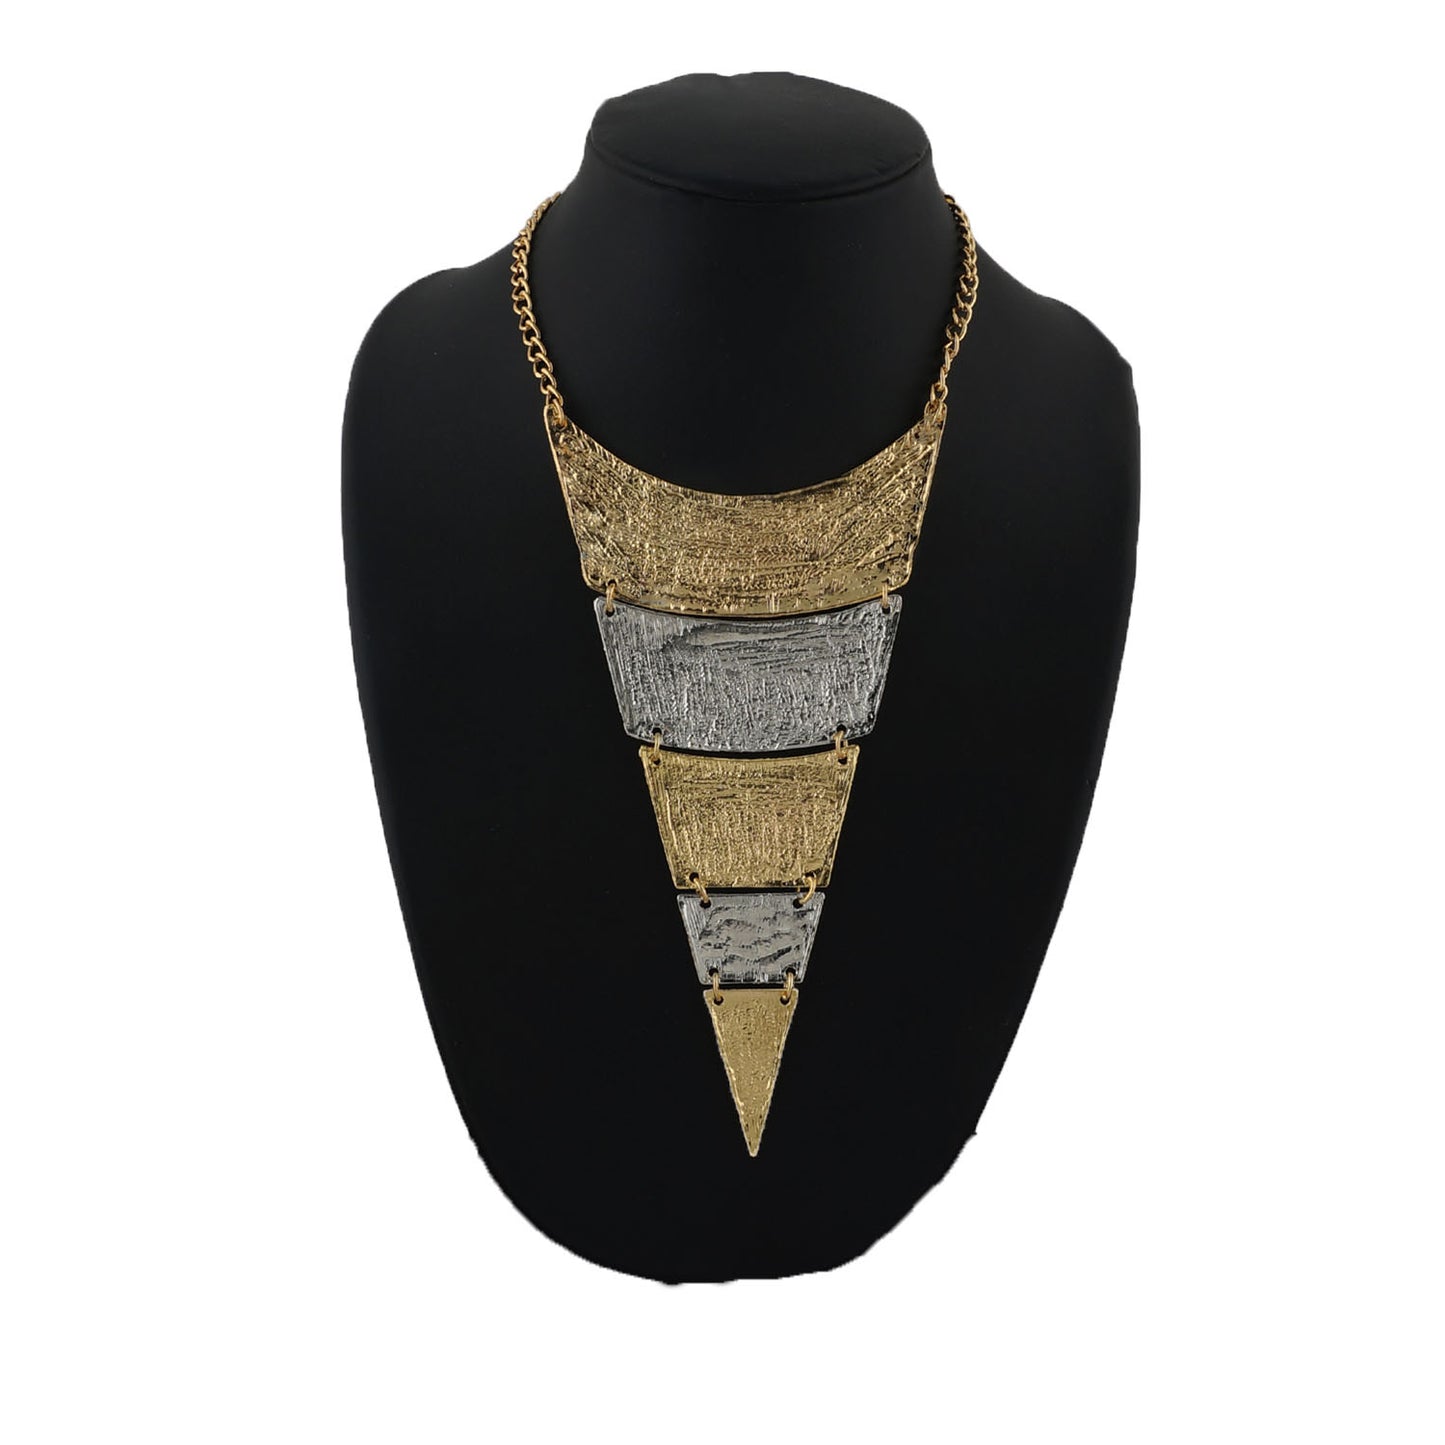  Gold and Silver Coloured Triangular Geometrical Necklace For Girls and Women